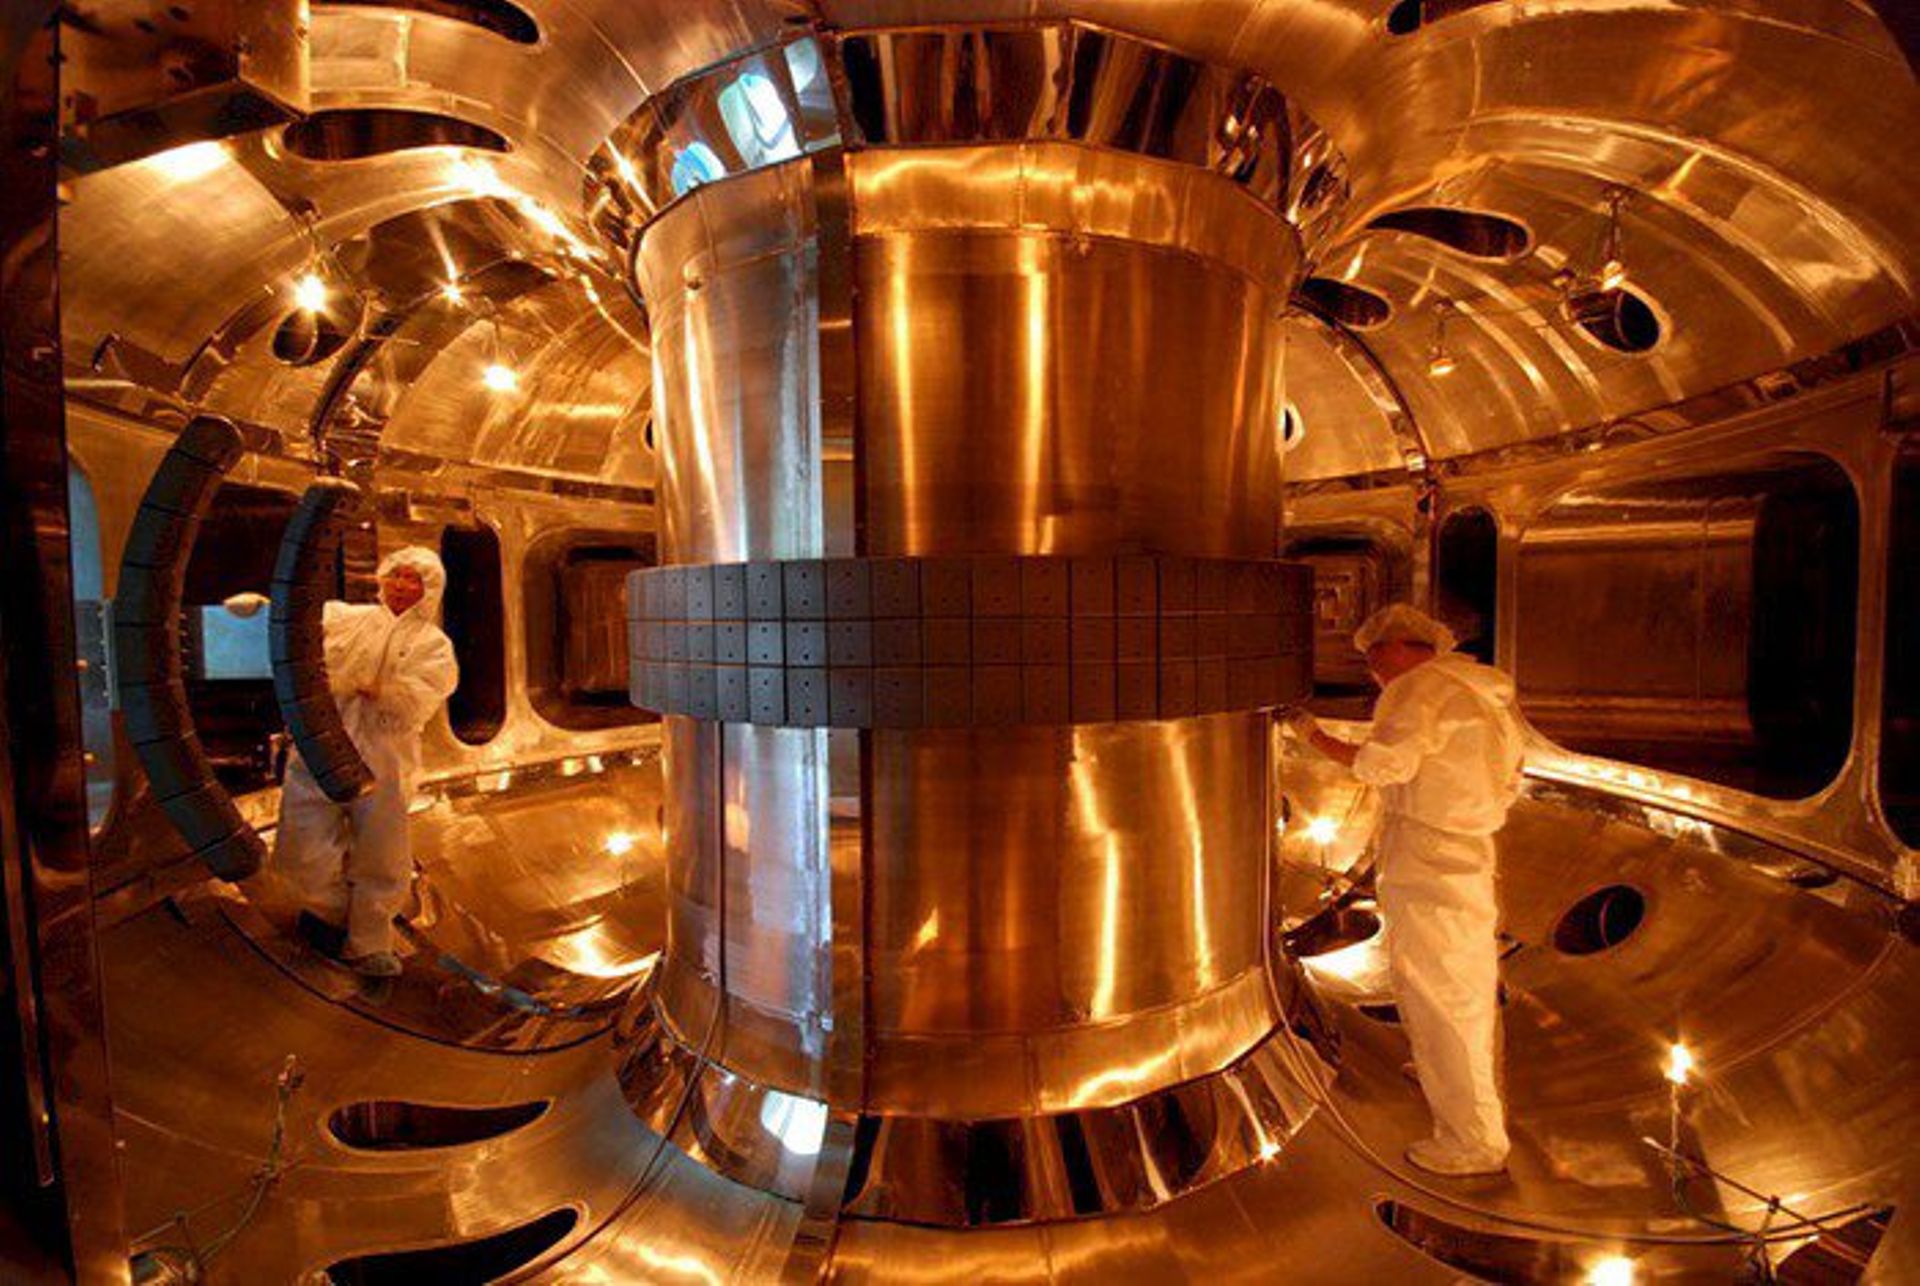 China’s Artificial Sun Breaks Record for Longest Sustained Nuclear Fusion